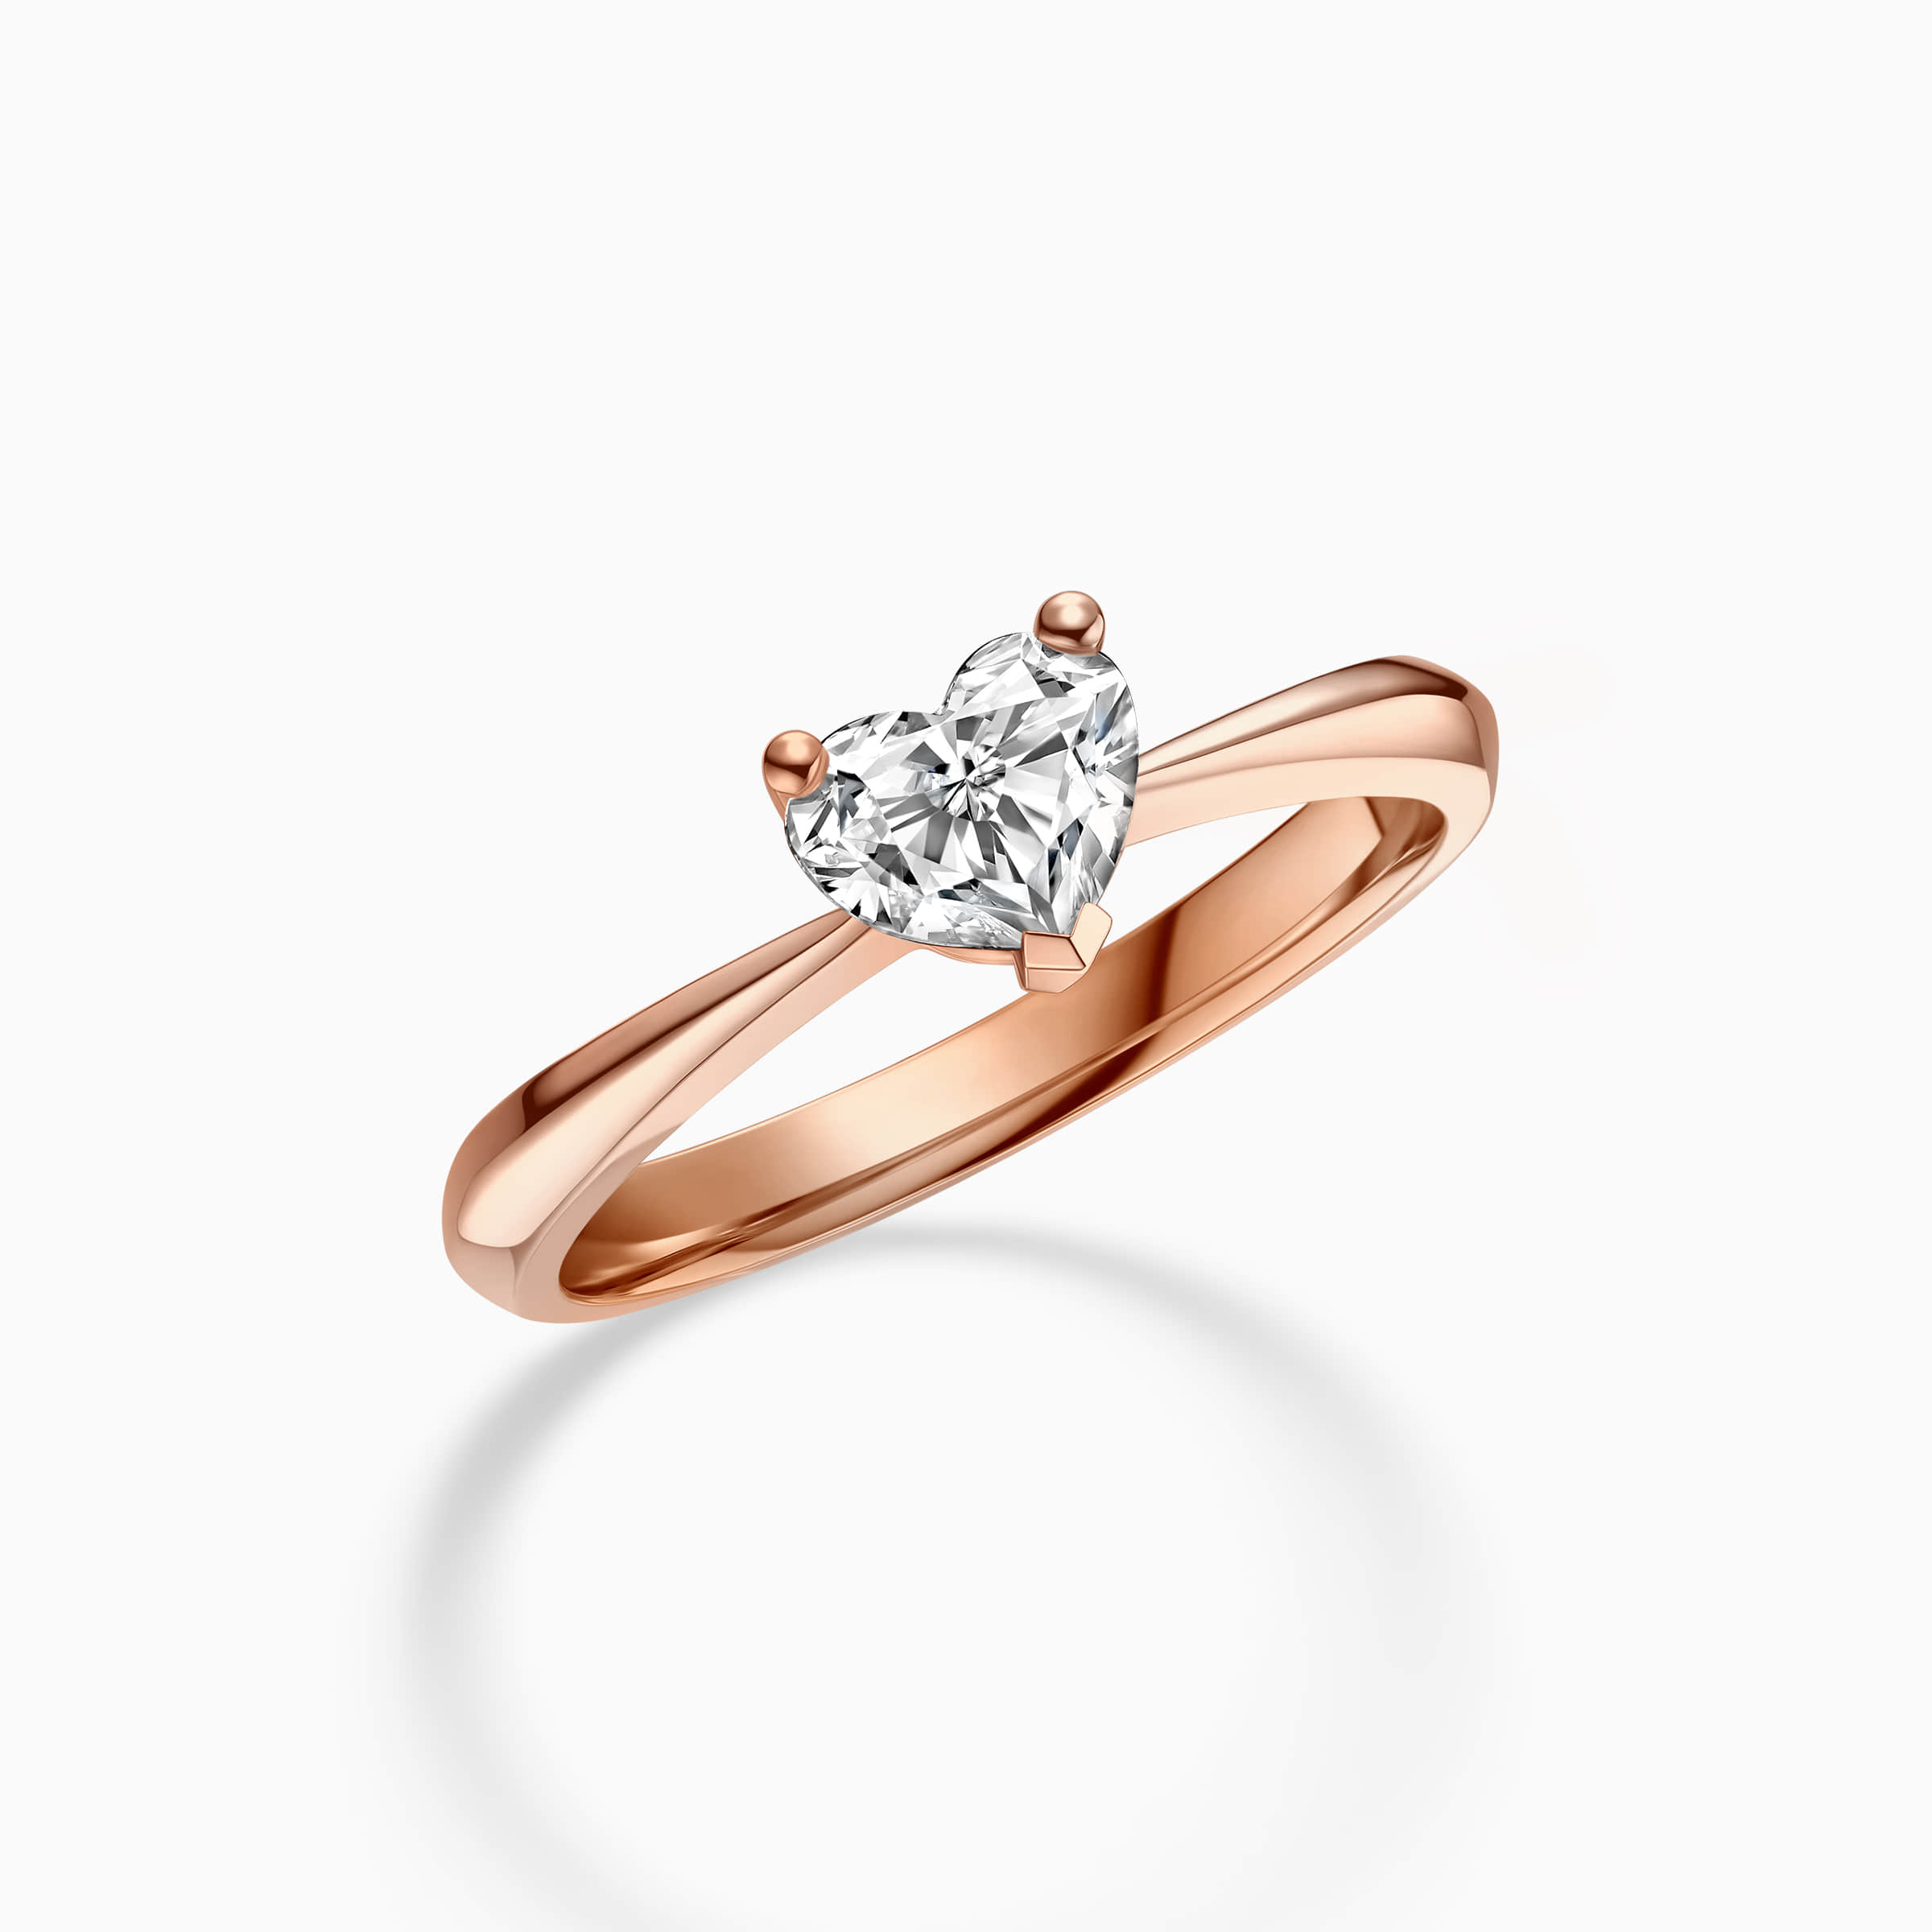 darry ring heart shaped solitaire diamond engagement ring rose gold